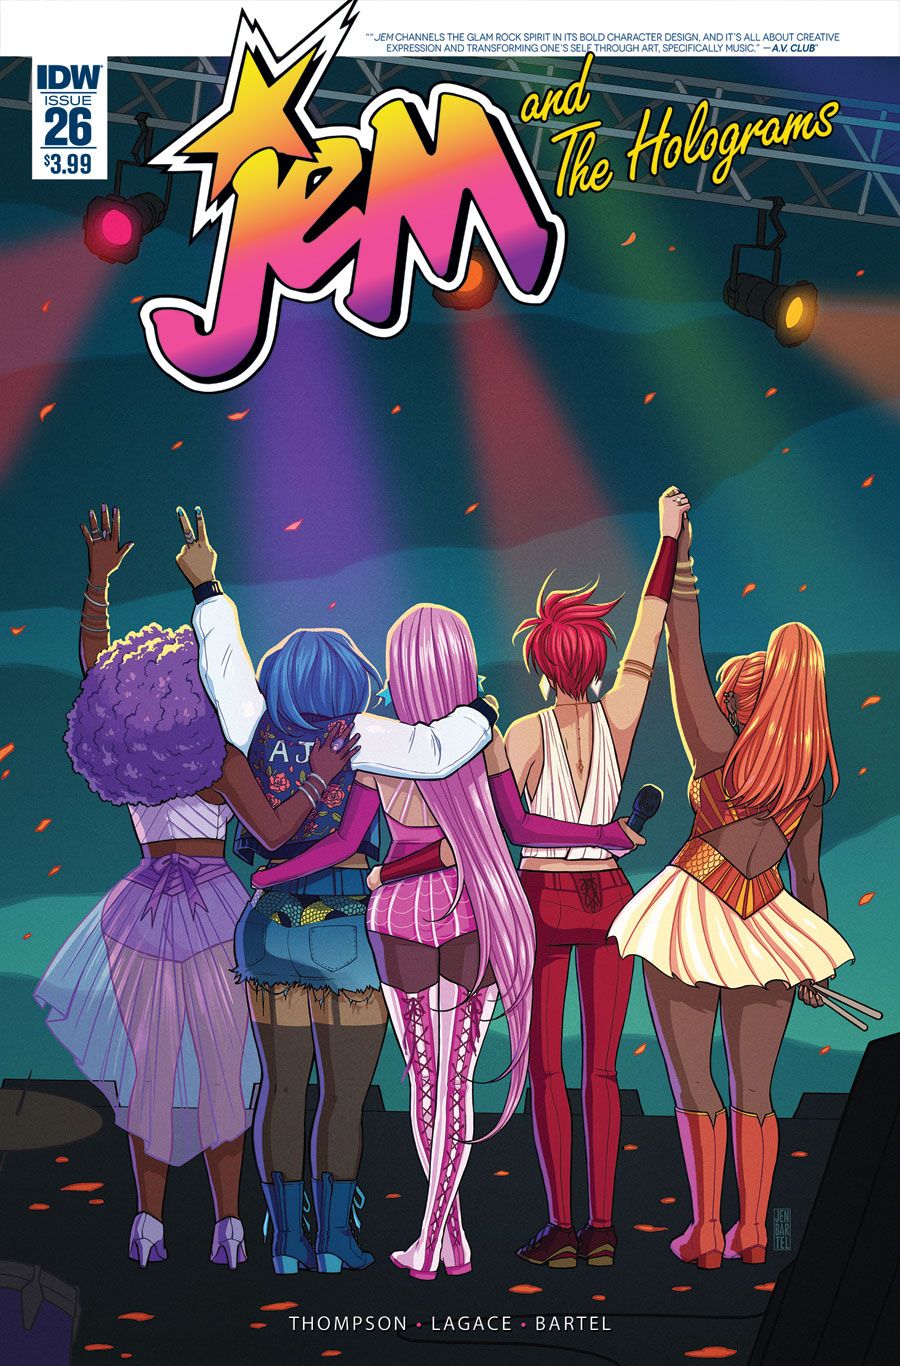 Jem and the Holograms #26 cover